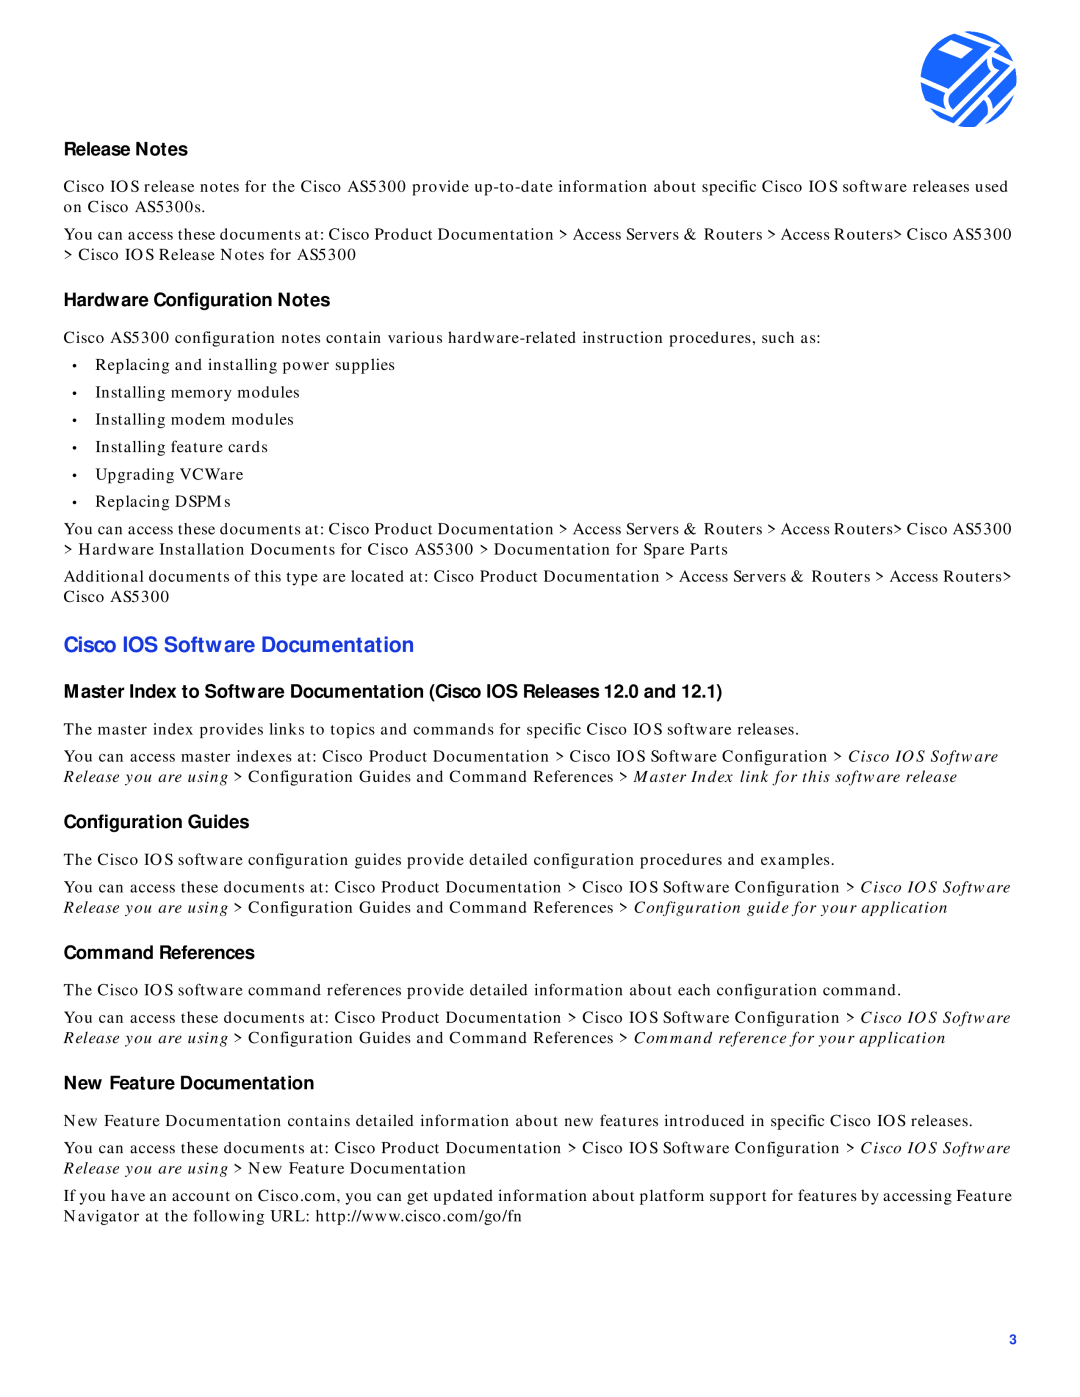 Cisco Systems AS5300 Cisco IOS Software Documentation, Release Notes, Hardware Configuration Notes, Configuration Guides 